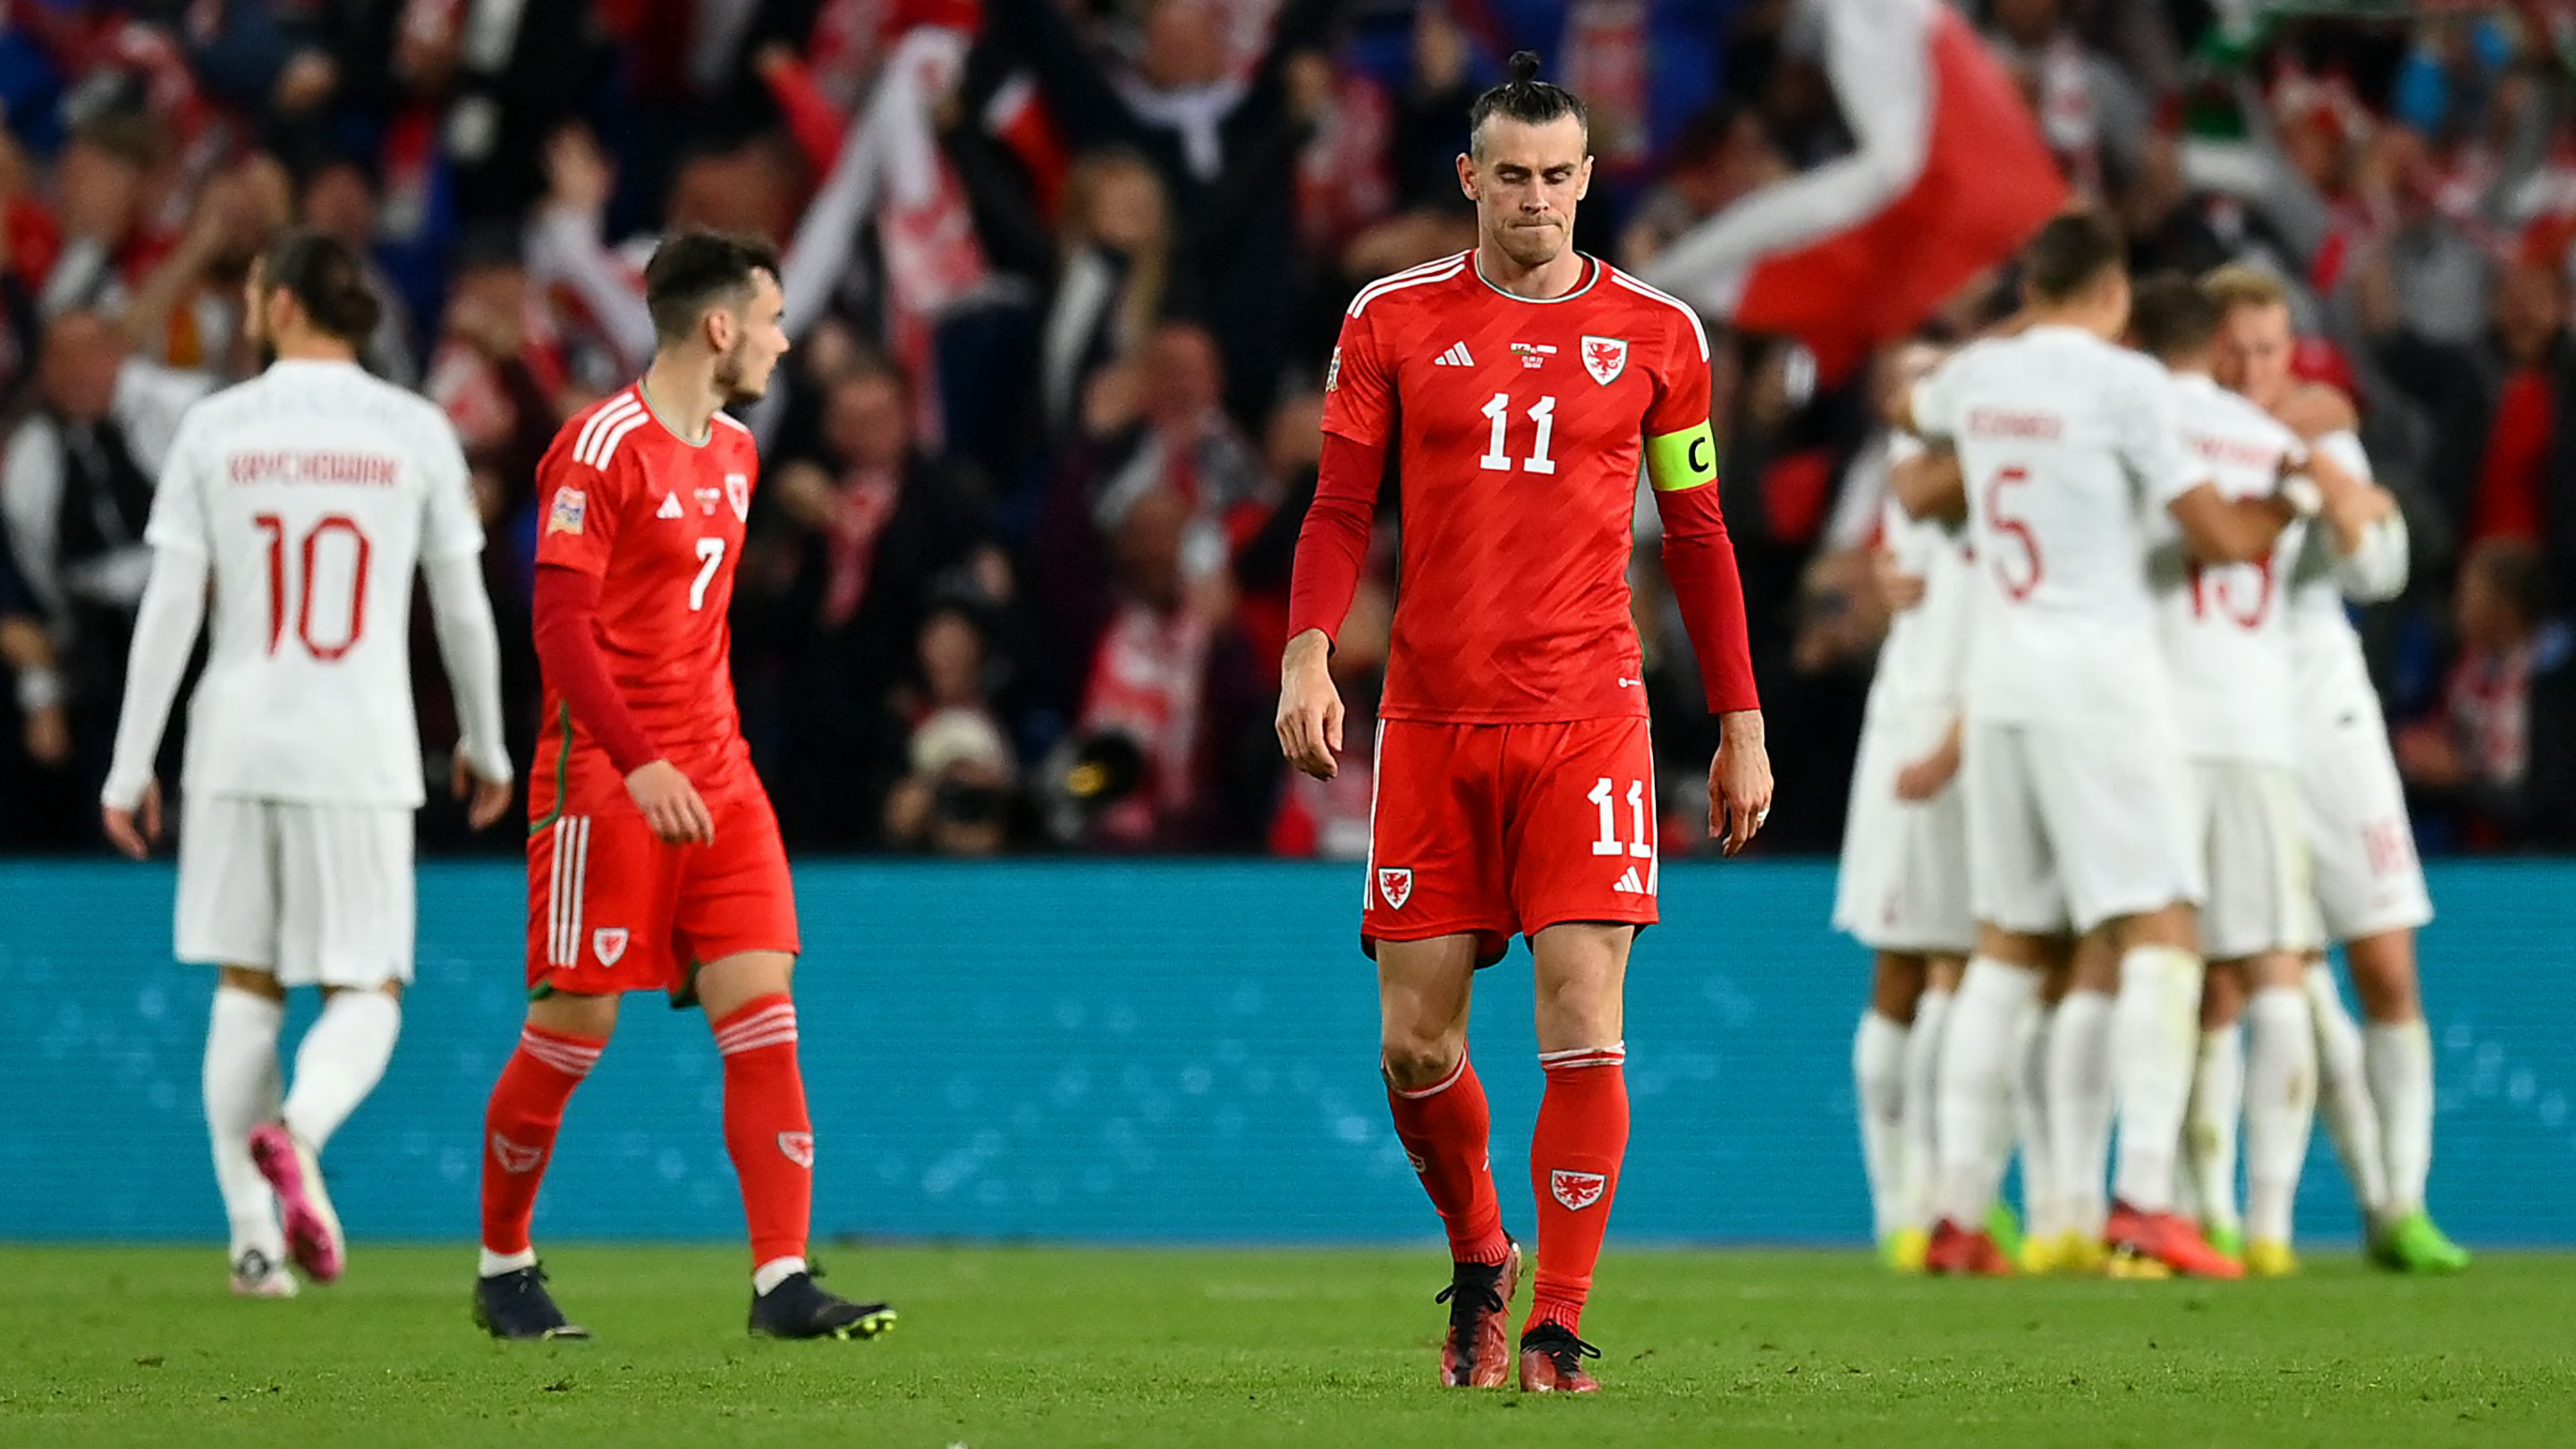 Wales 0-1 Poland: Swiderski winner sends hosts to Nations League relegation ahead of World Cup